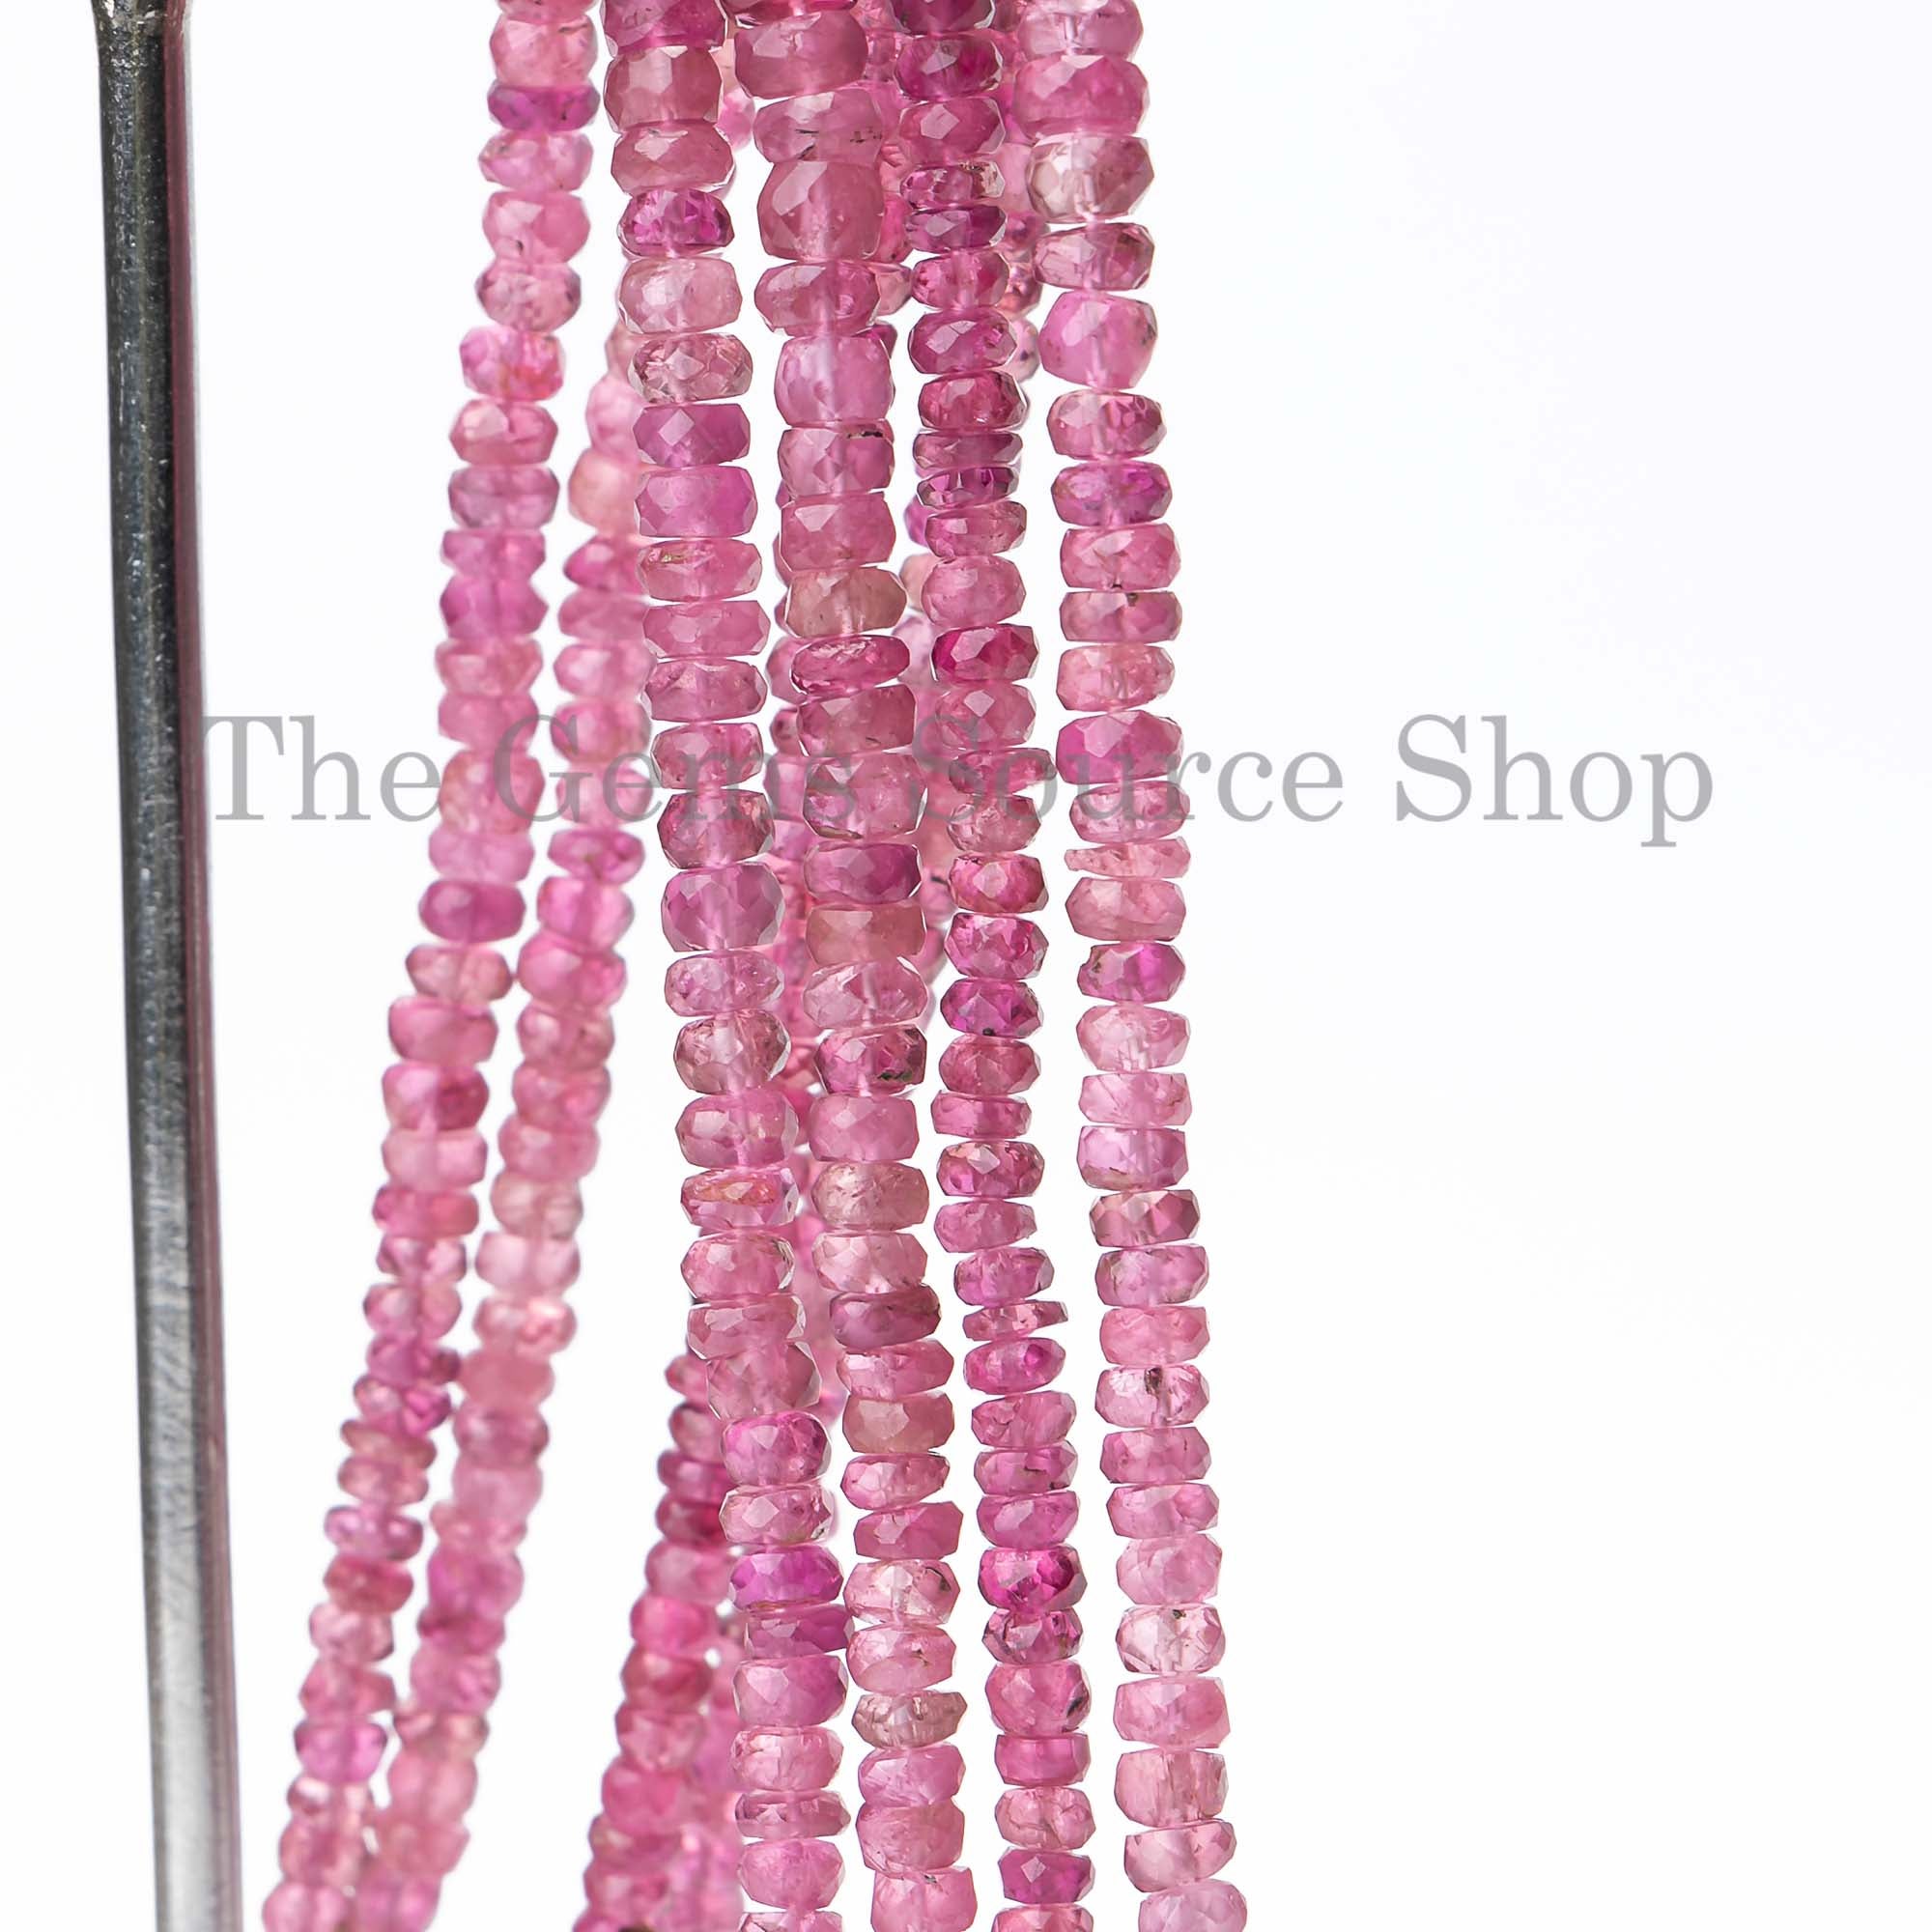 New Arrival 3-3.5mm Rubellite Tourmaline Faceted Rondelle Beads, Rubellite Faceted Beads